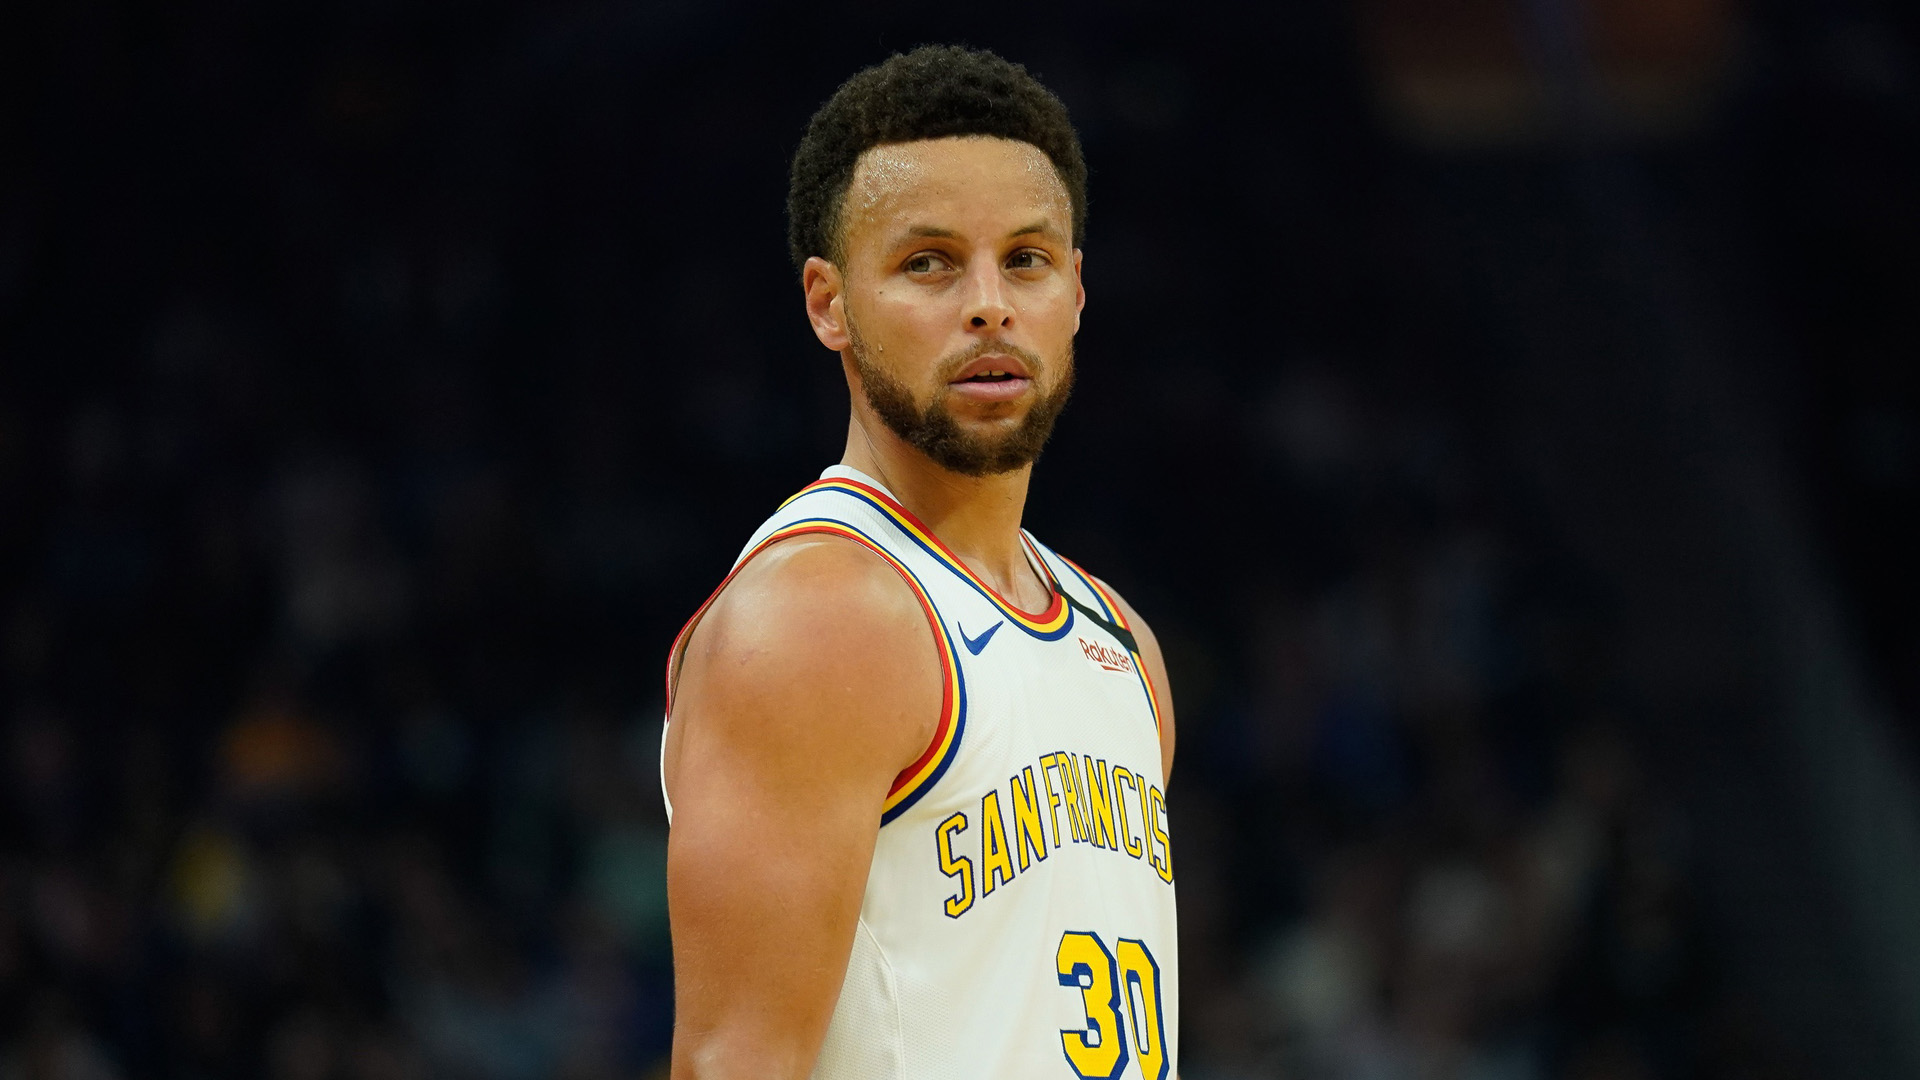 Stephen Curry Is Standing In Black Wallpaper Wearing White Sports Dress 2K Stephen Curry